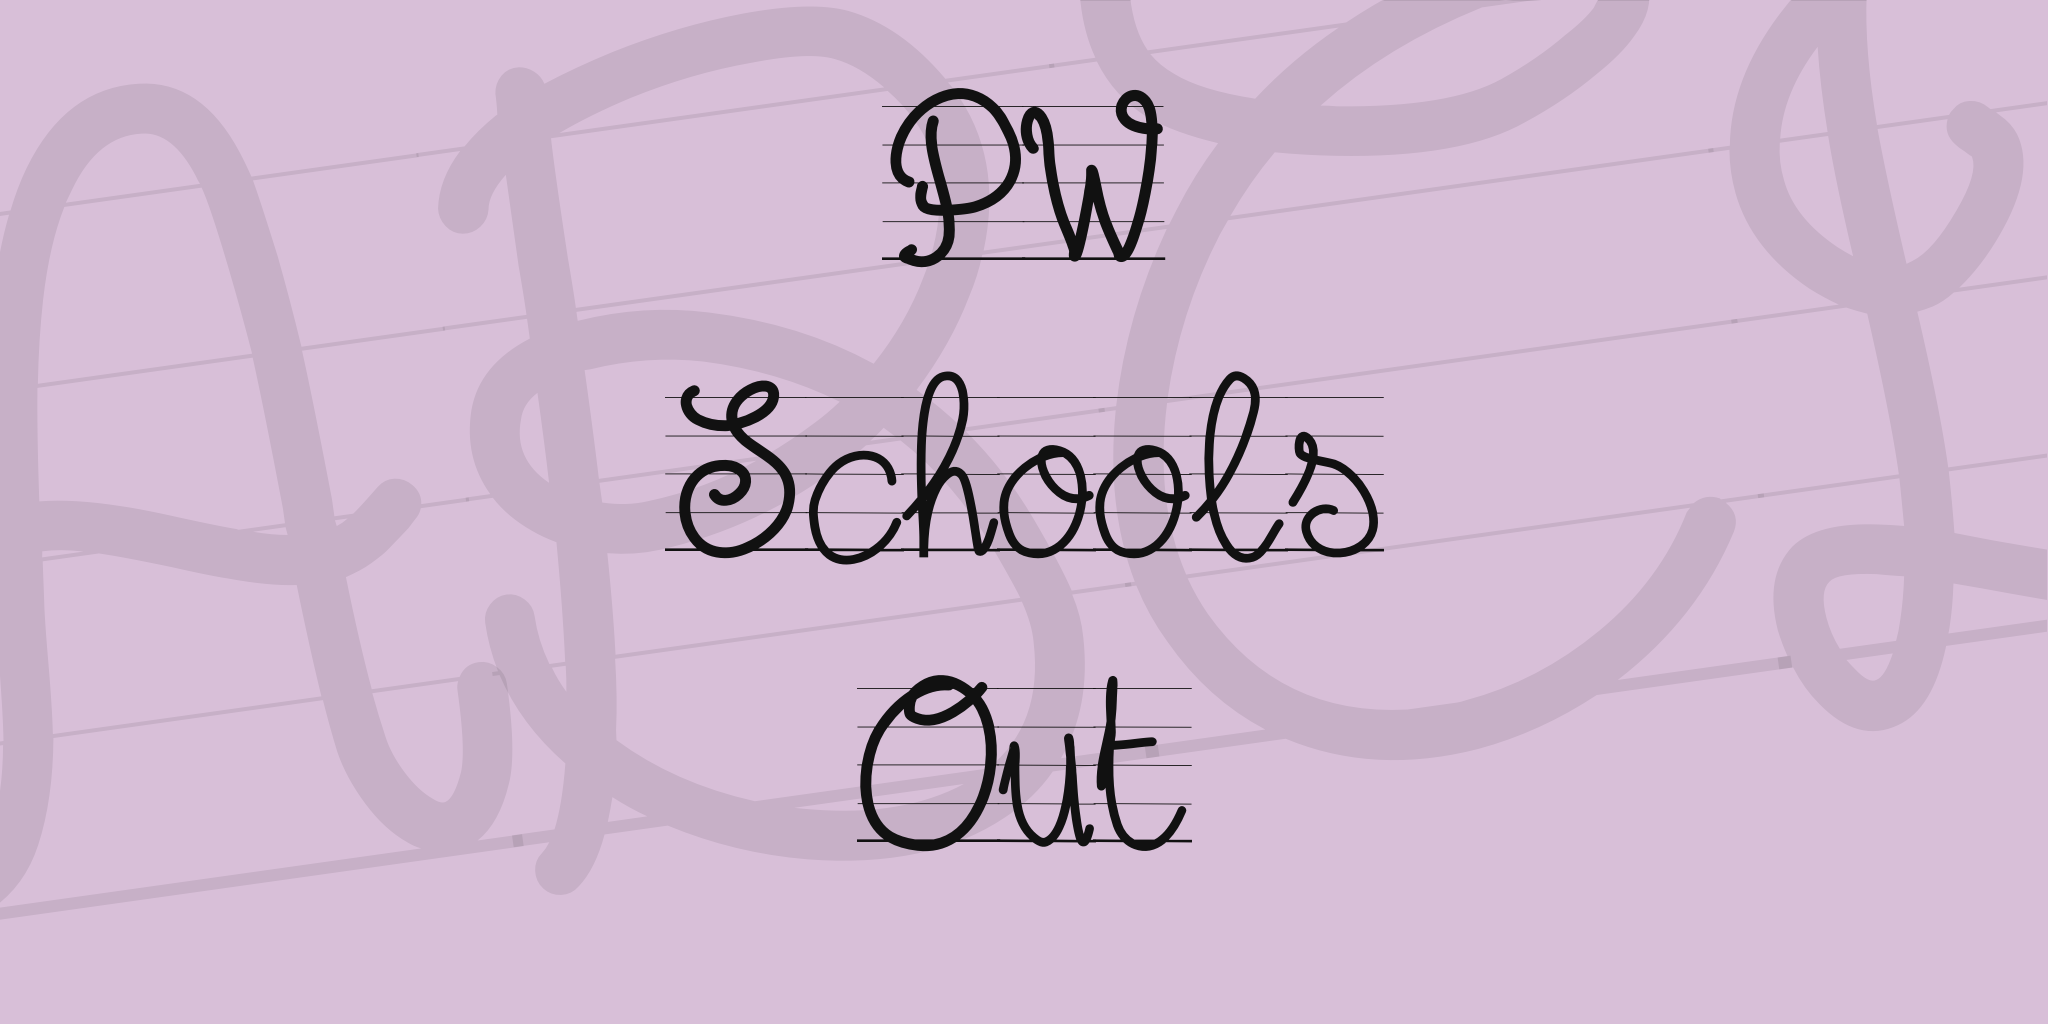 Pw Schools Out